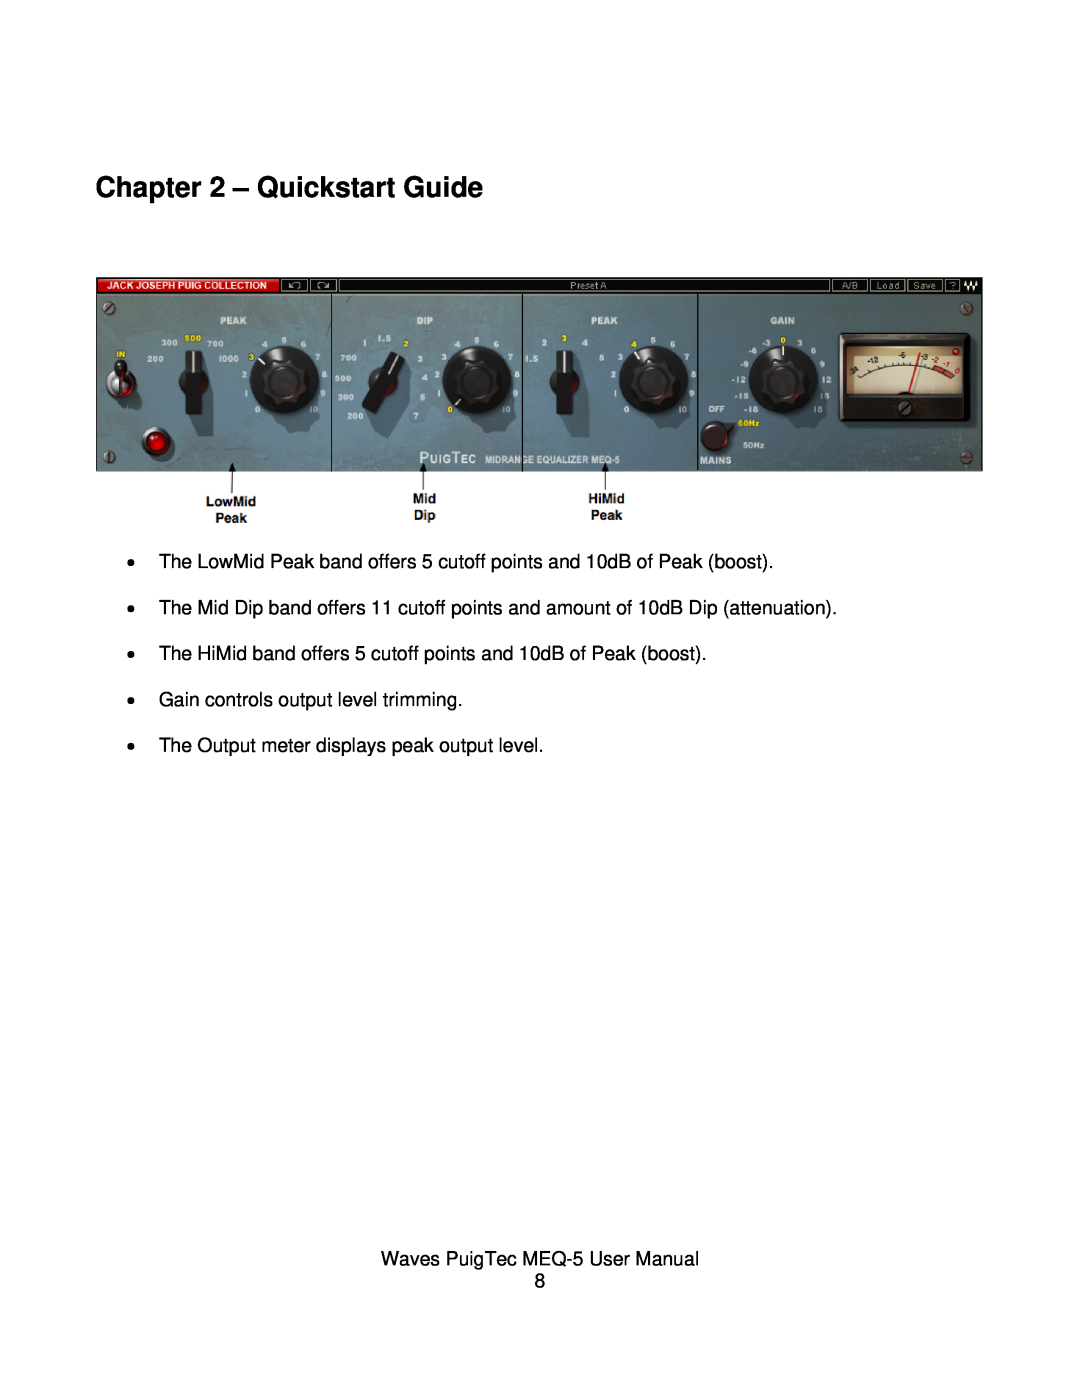 Waves MEQ-5 user manual Quickstart Guide, Gain controls output level trimming, The Output meter displays peak output level 